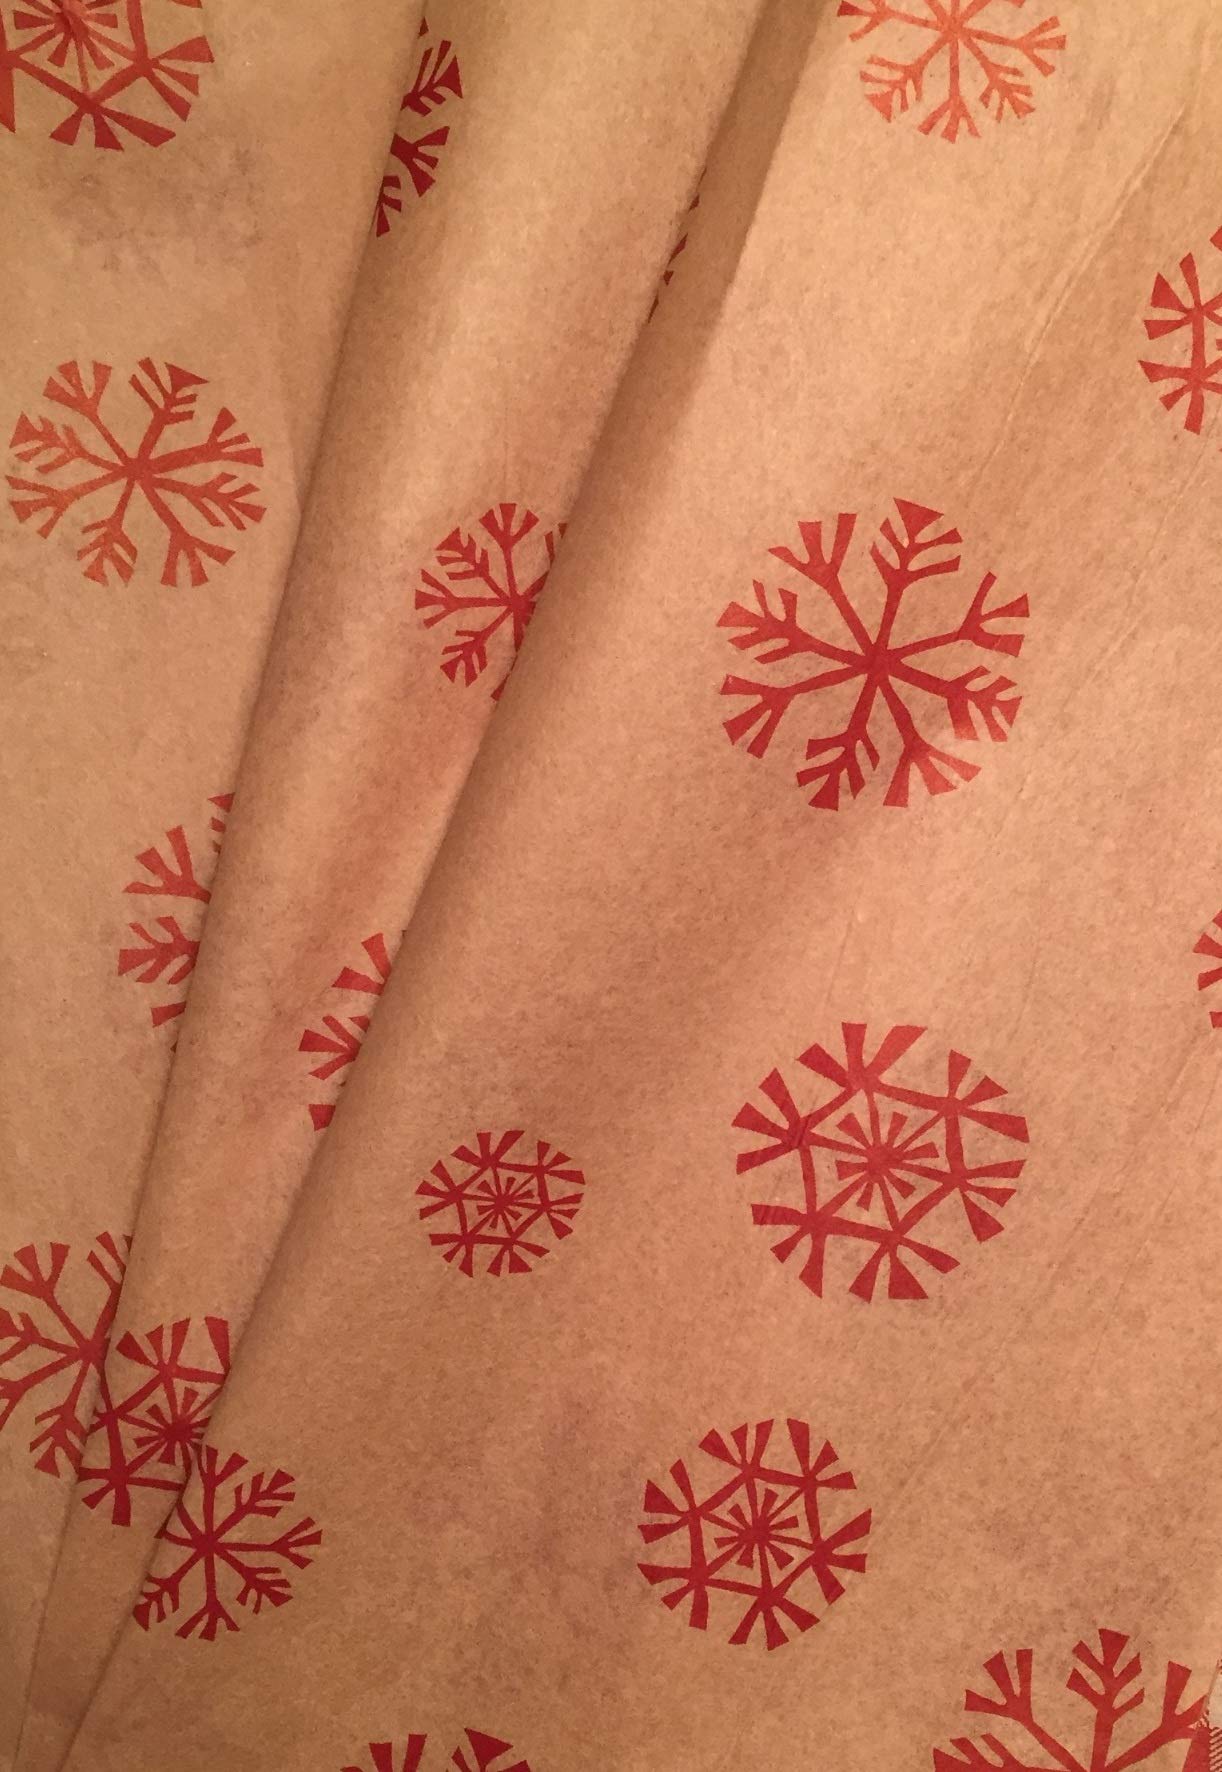 Gift WRAP Tissue Paper for Christmas, 24 Sheets, Large 20x30, Printed Decorative Tissue Paper for Gift Wrapping (RED Kraft Snowflake)